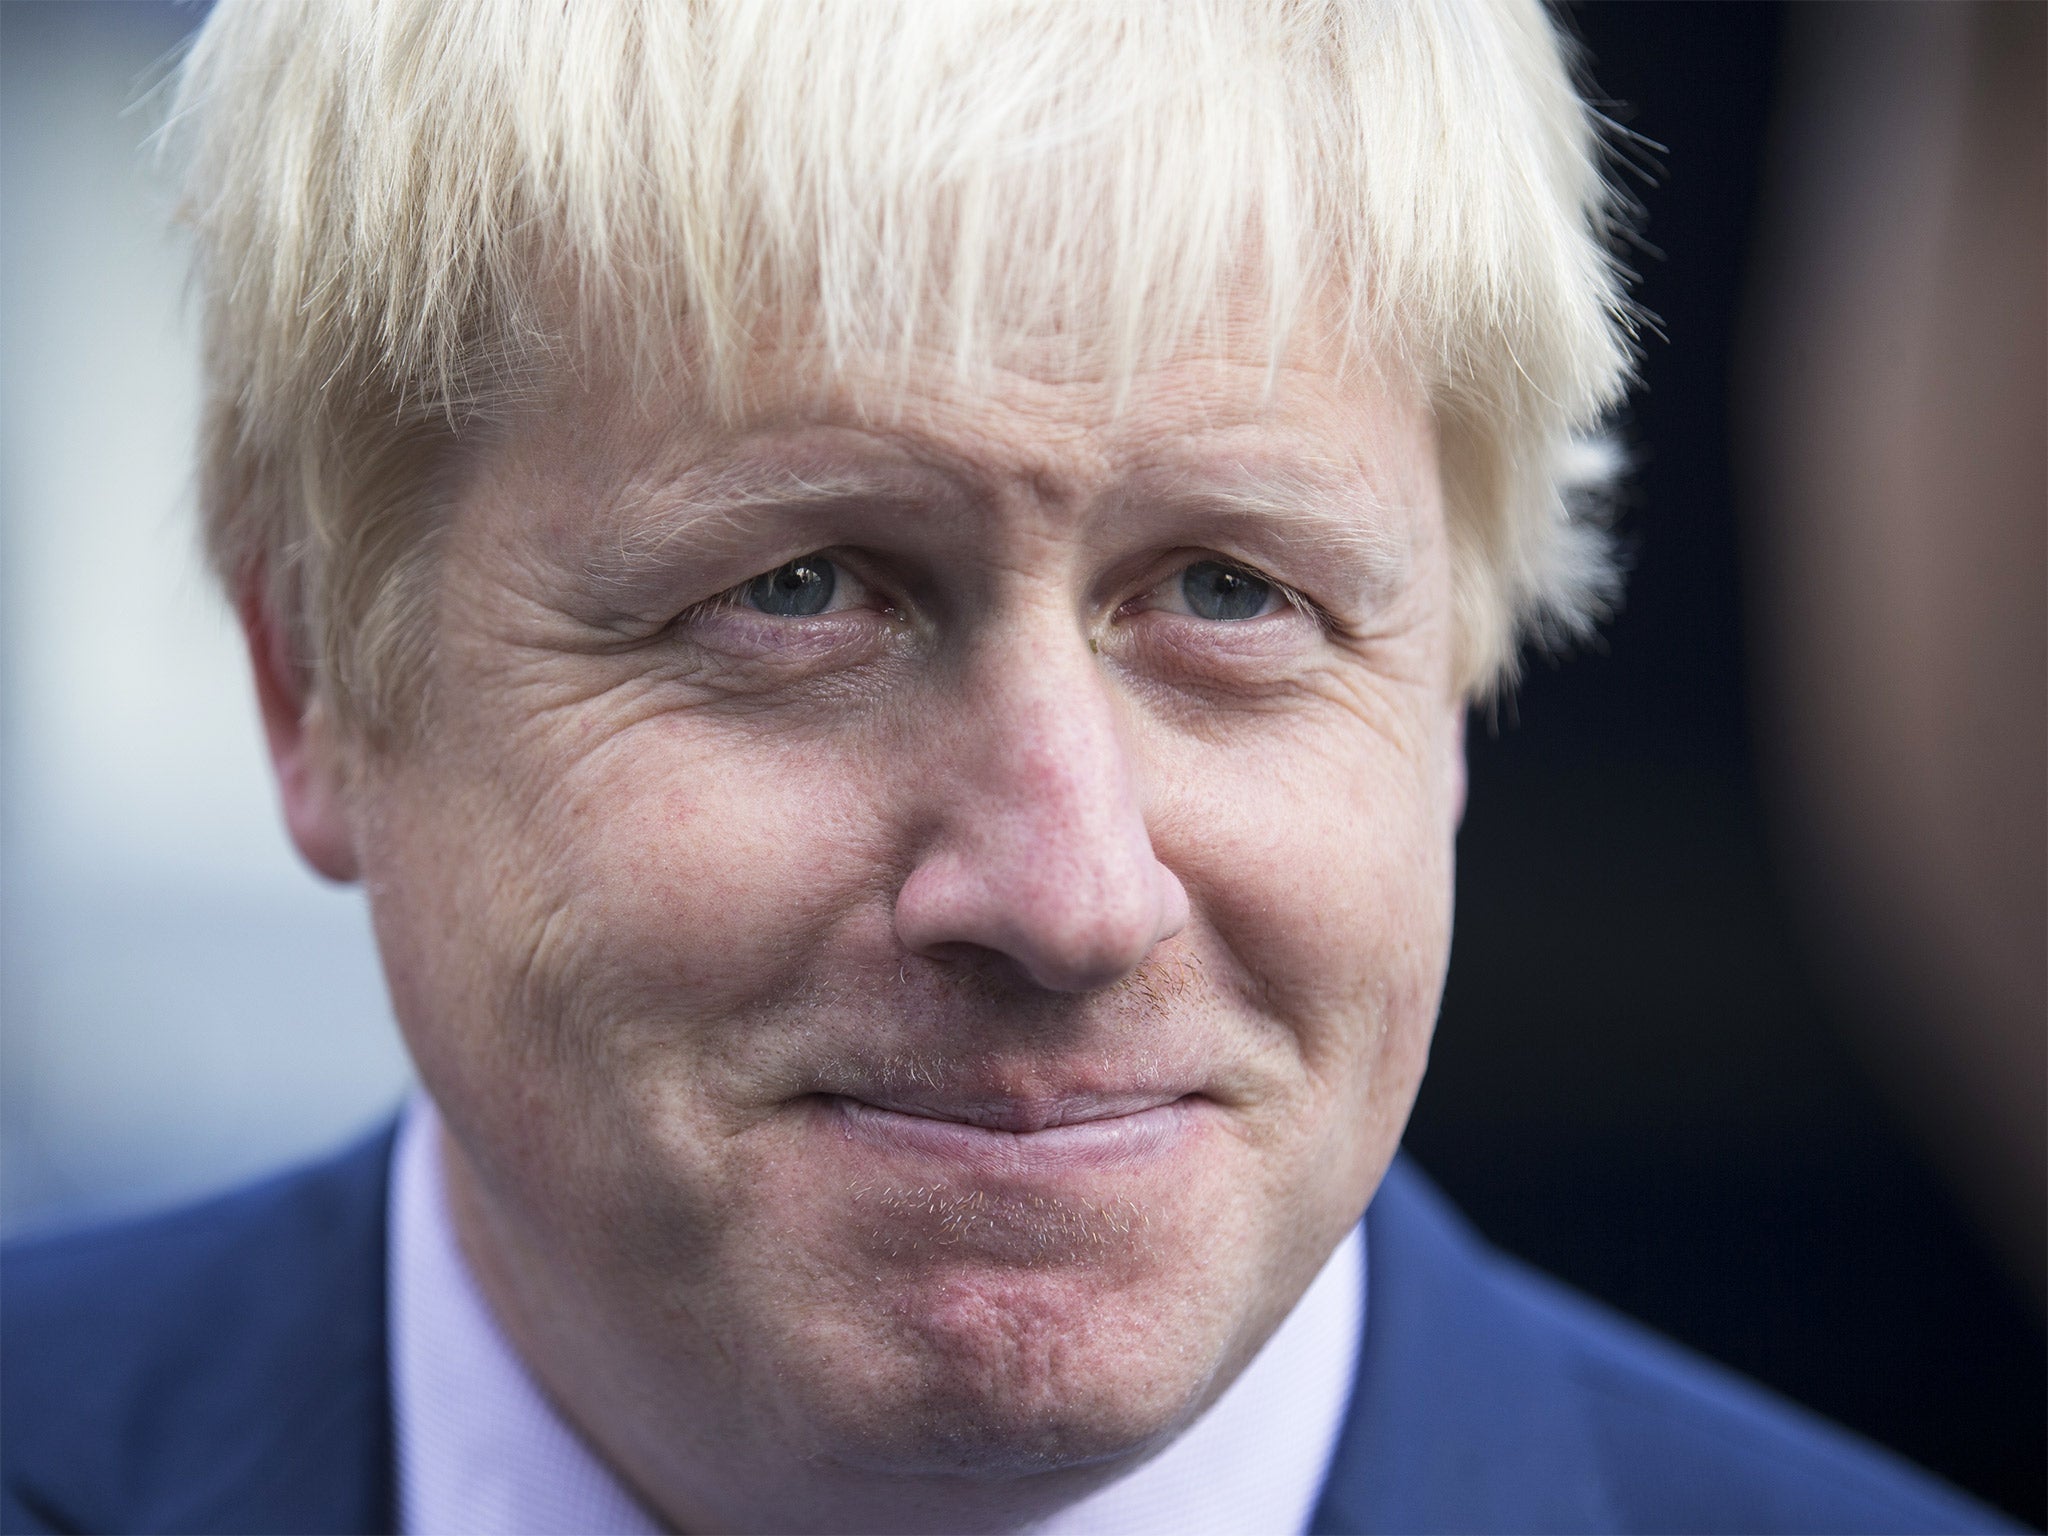 London Mayor Boris Johnson believes a 'generous exit' could be negotiated